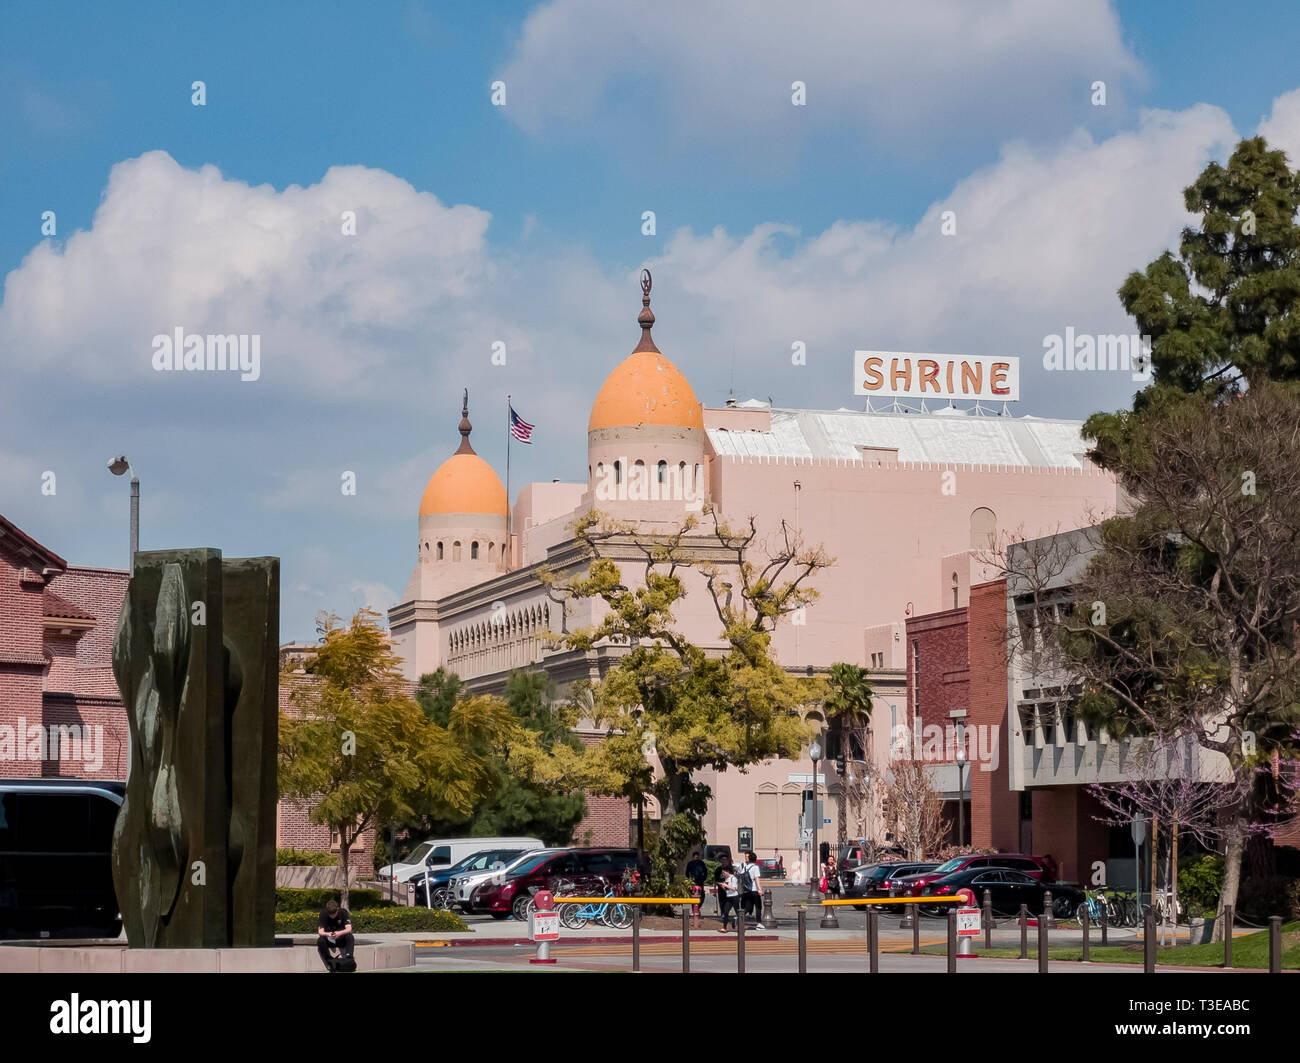 Los Angeles, APR 2: Exterior view of Shrine Auditorium and Expo Hall on APR 2, 2019 at Los Angeles, California Stock Photo